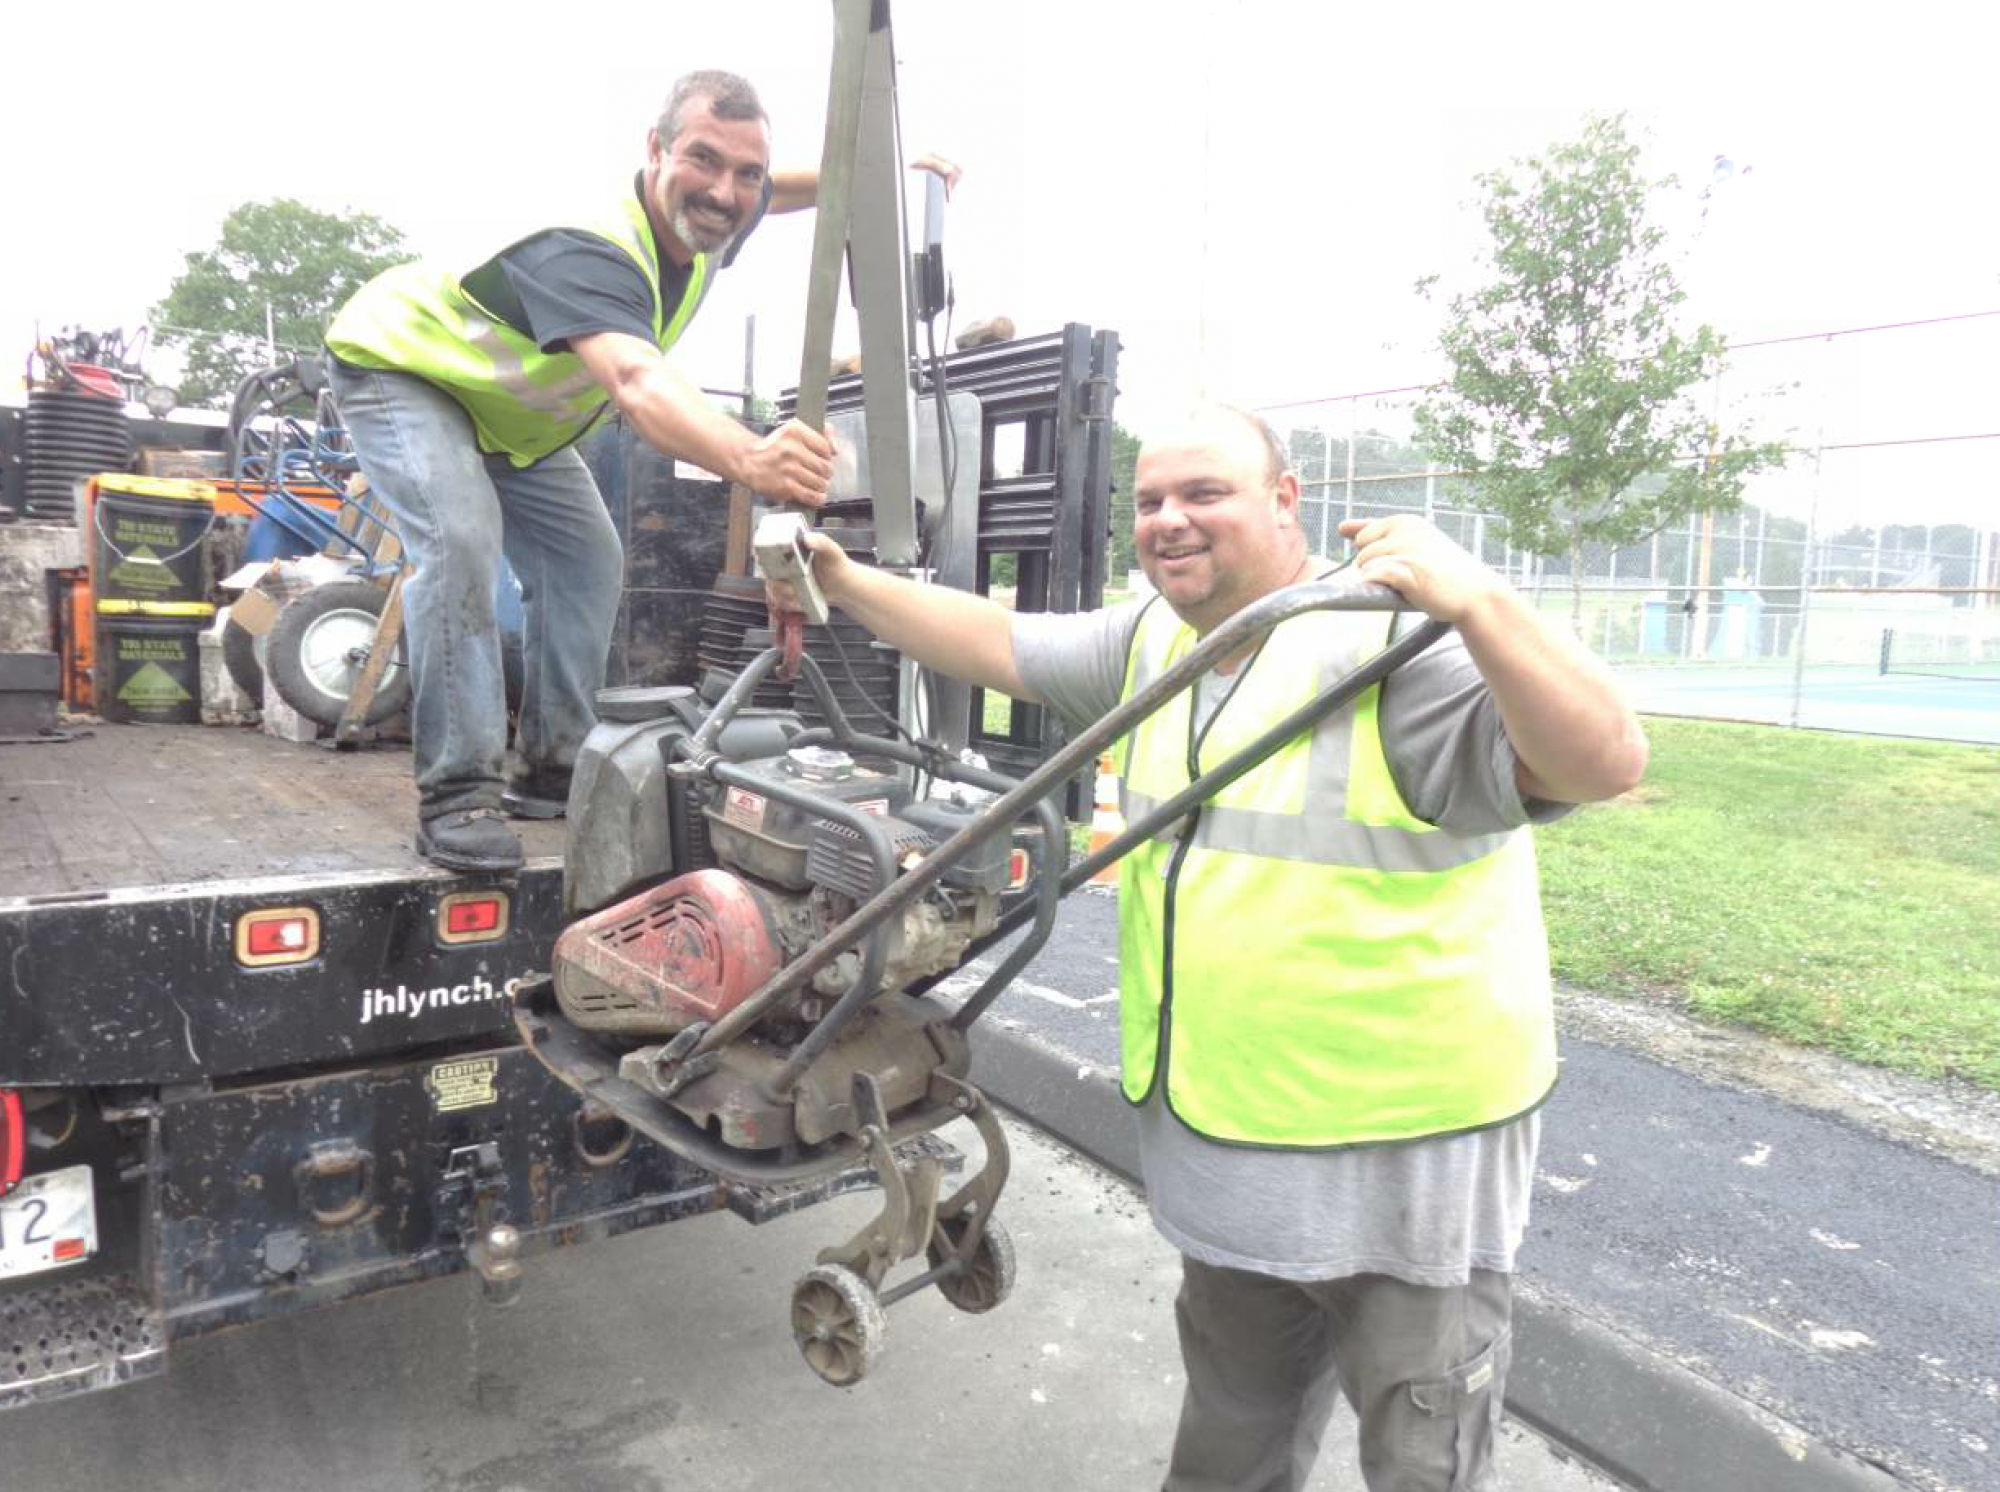 Billy Lopes, who is in the back of the truck, manipulates the crane that brings the plate compactor on board. Greg Pacheco, on the ground, helps guide the plate compactor. Notice the wheels hanging in the “down” position.